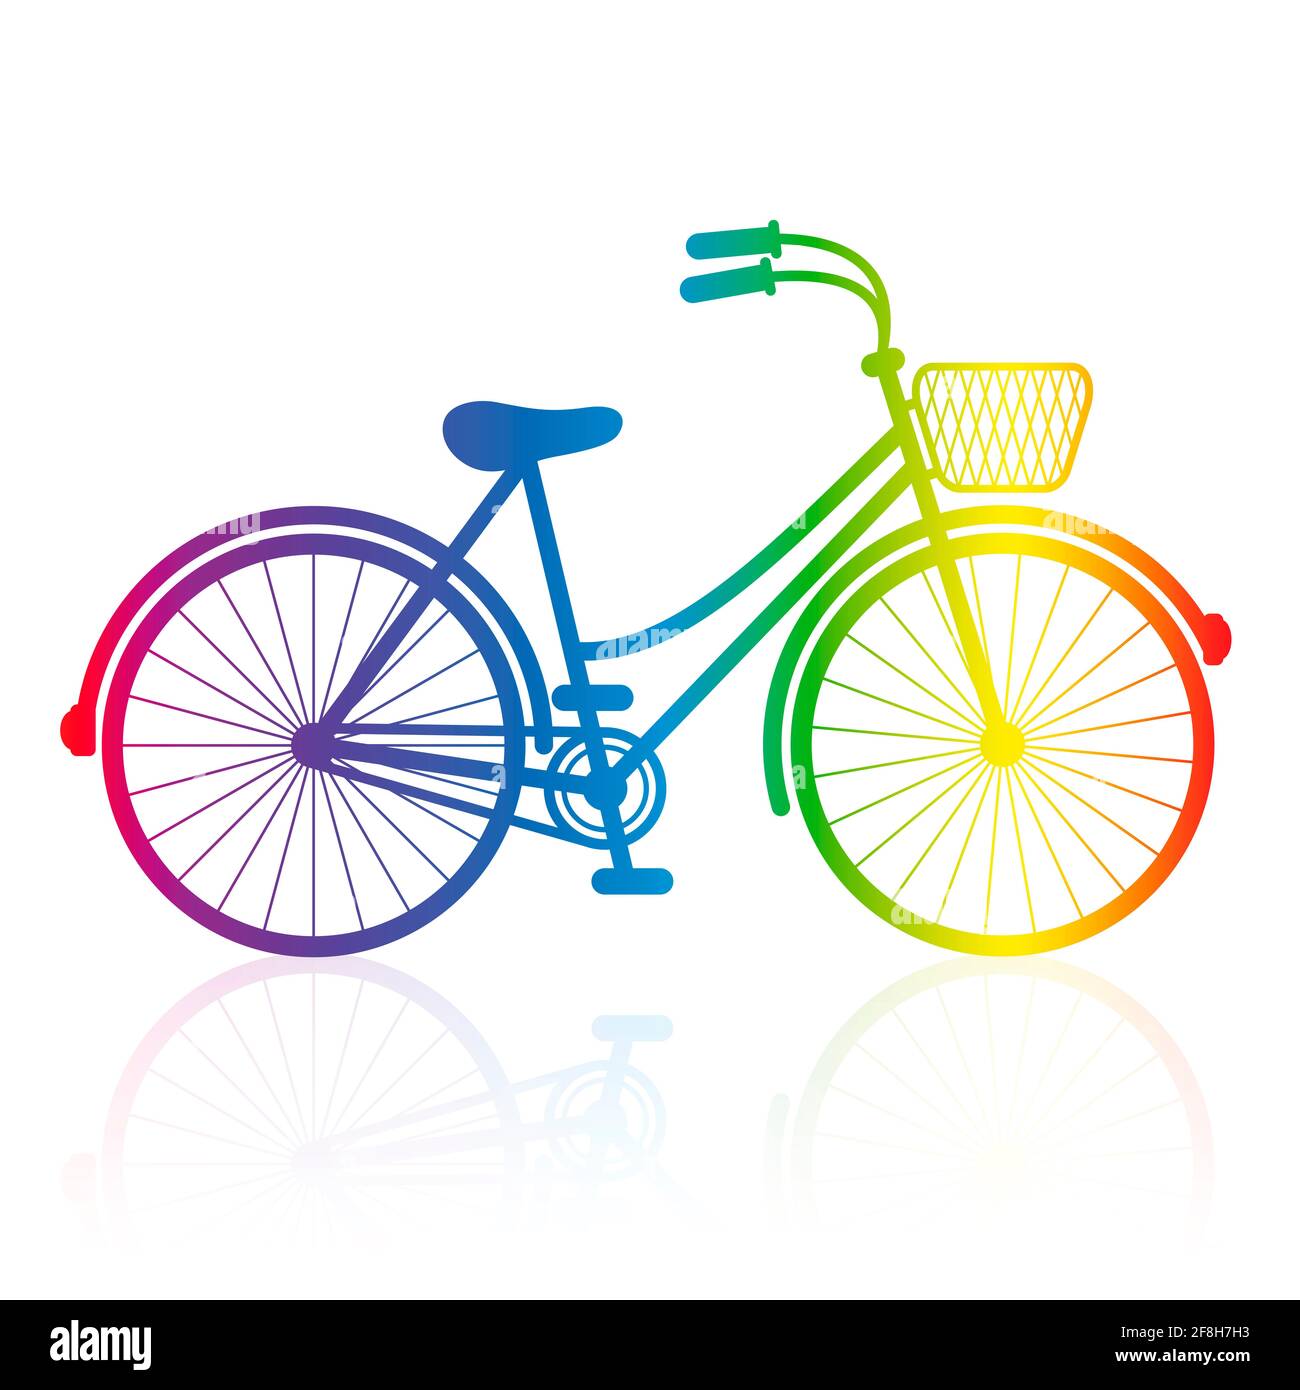 Ladies bike, rainbow gradient colored bicycle with wire basket - illustration on white background. Stock Photo